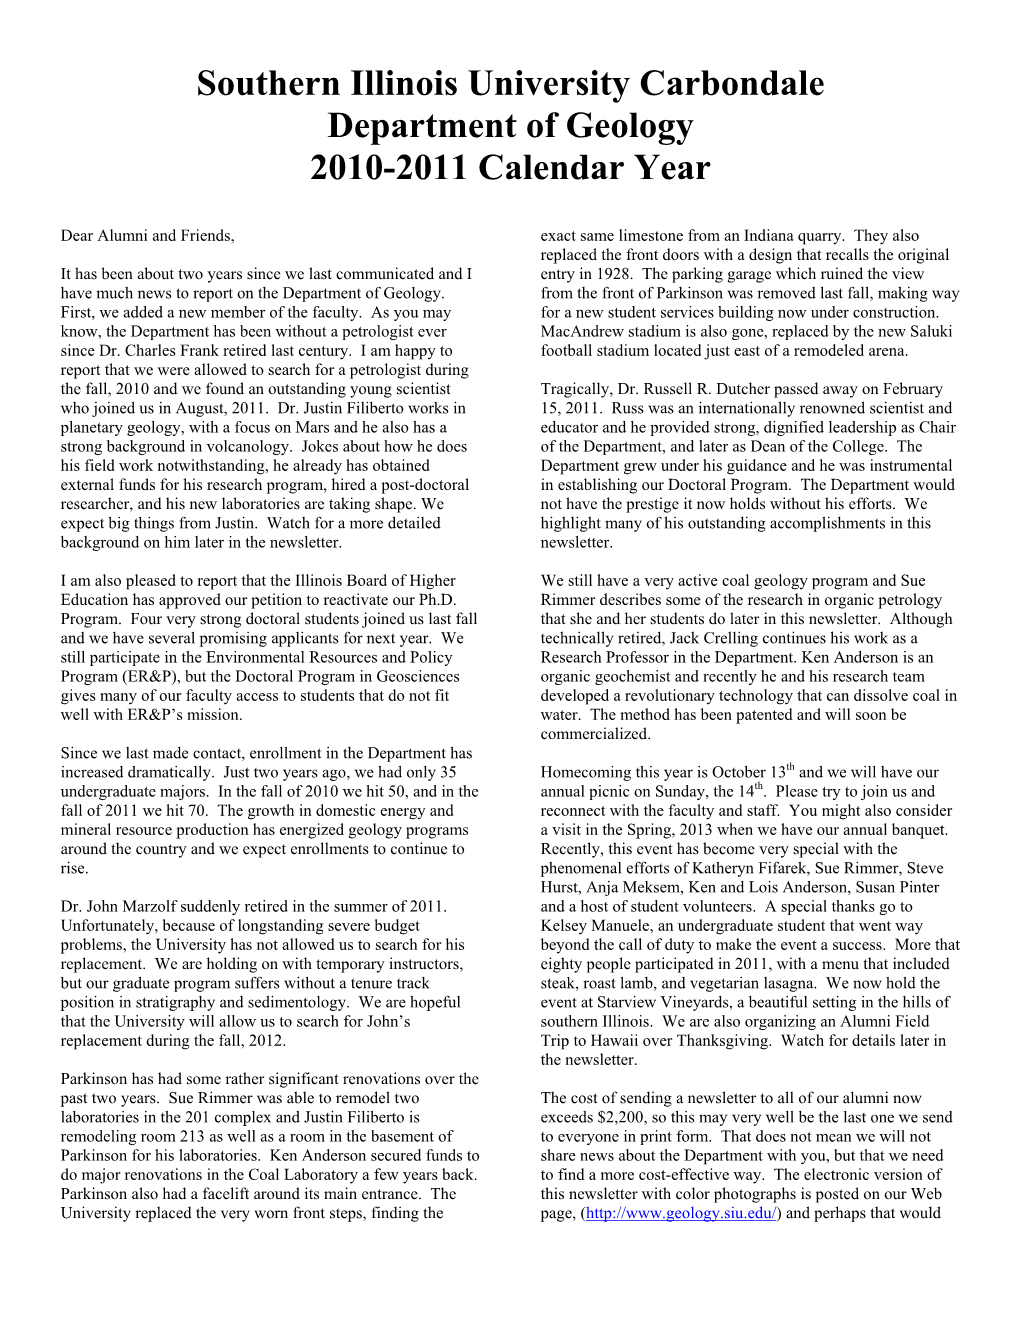 Southern Illinois University Carbondale Department of Geology 2010-2011 Calendar Year